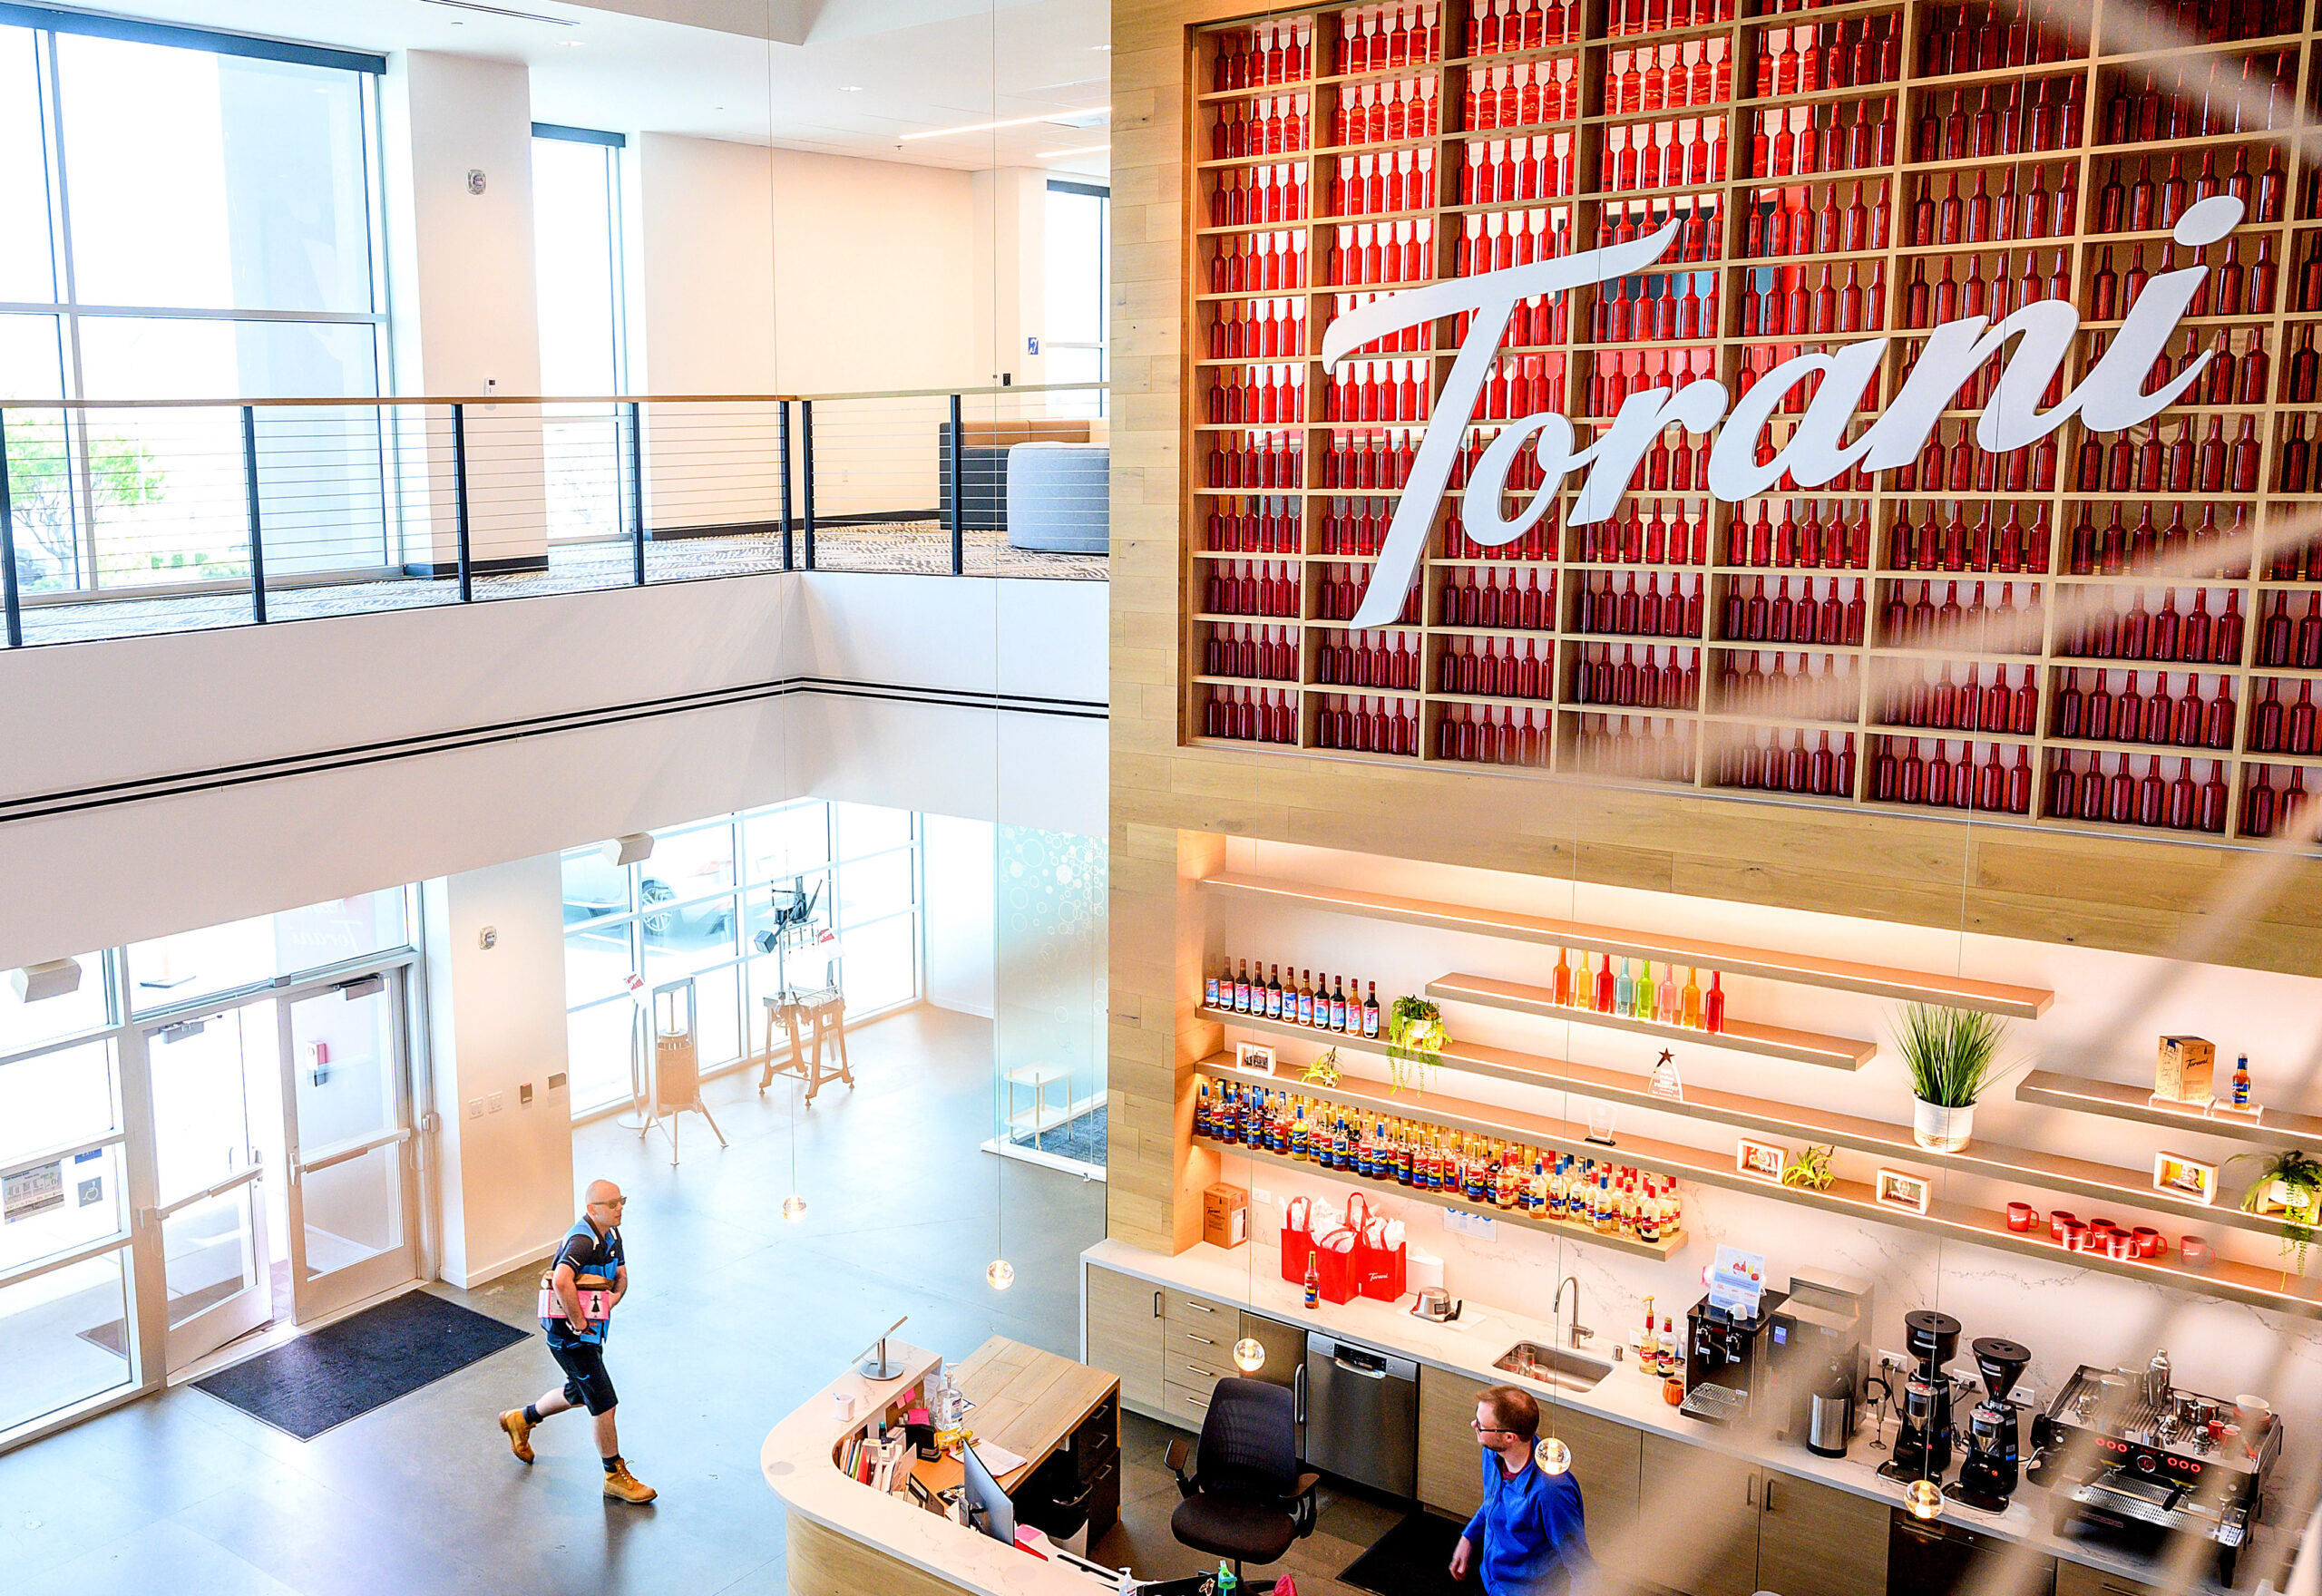 An image shows the lobby of a large office building with a sign that says &quot;Torani.&quot; 